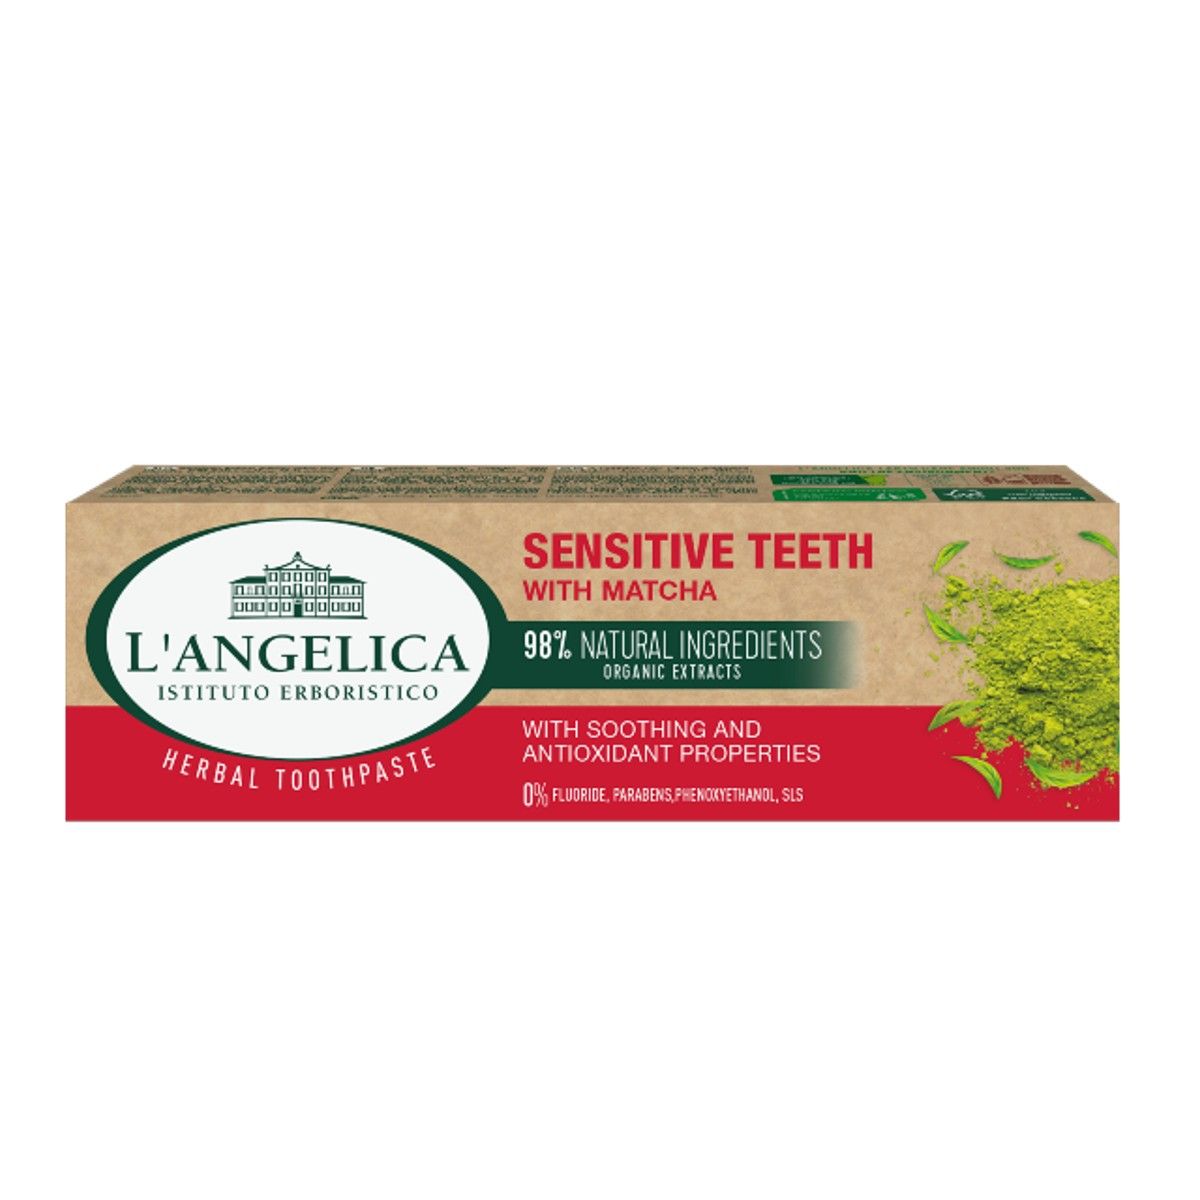 Toothpaste Sensitive teeth with Matcha